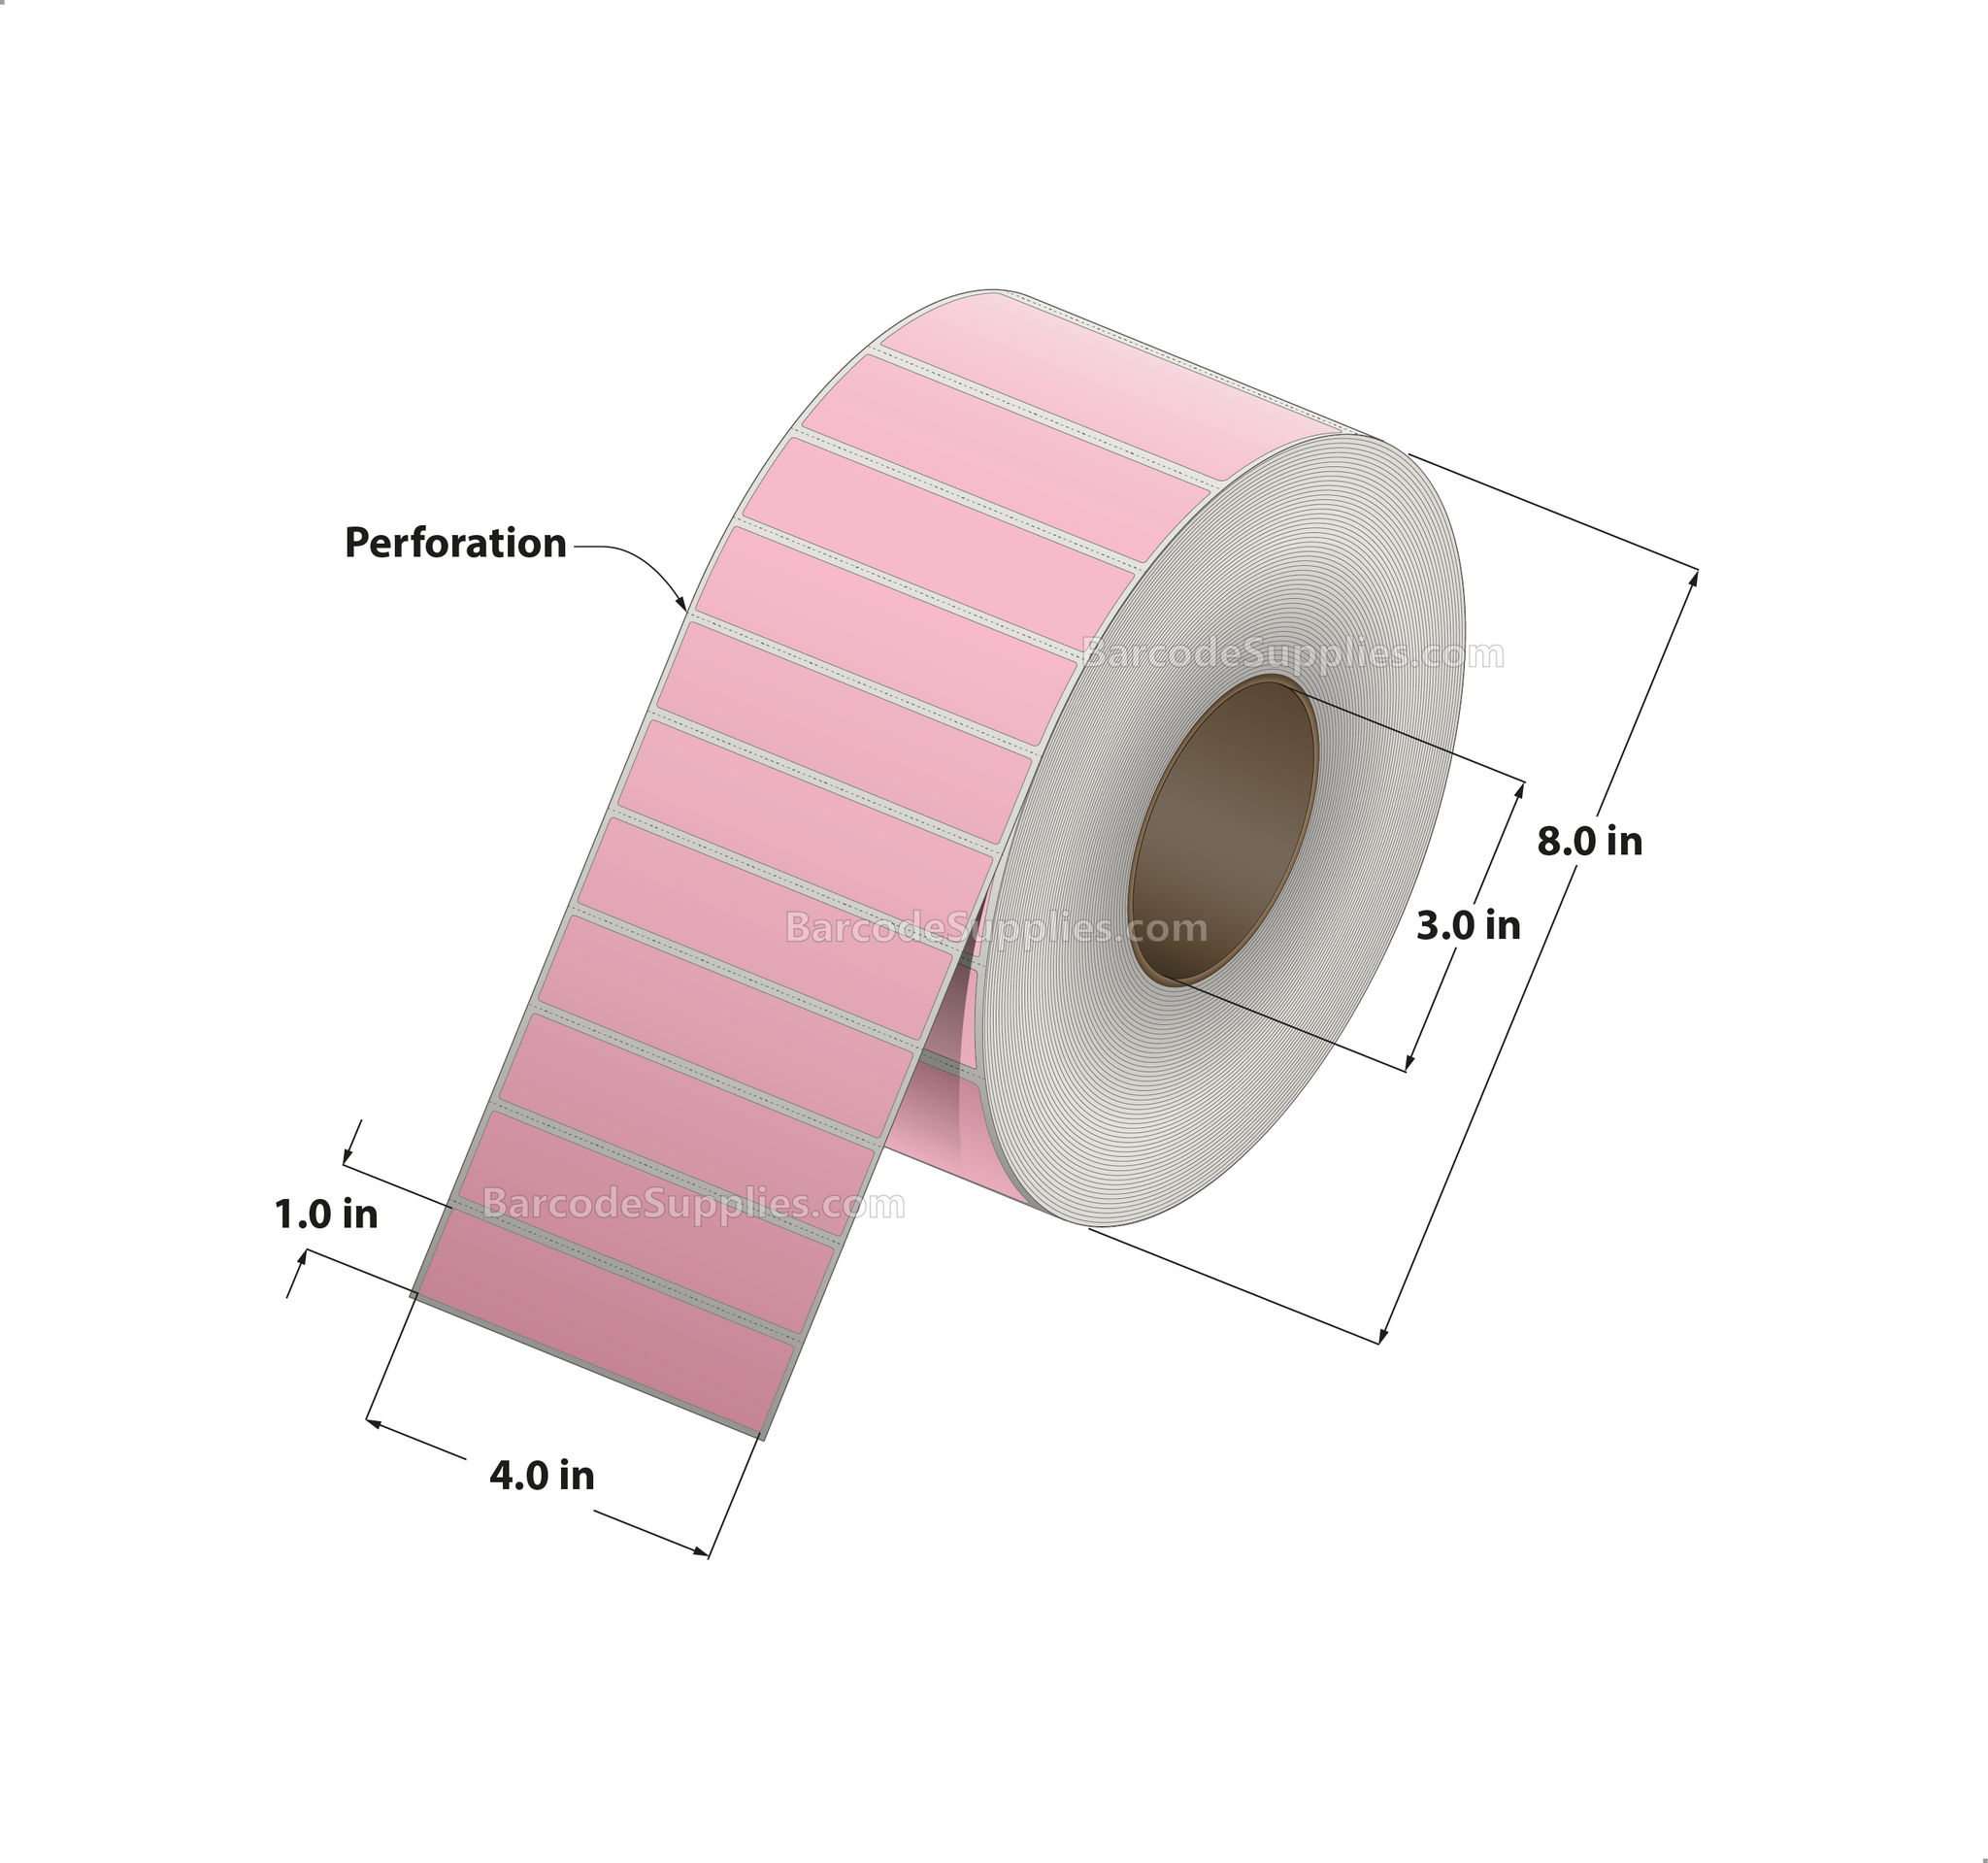 4 x 1 Thermal Transfer 176 Pink Labels With Permanent Adhesive - Perforated - 5500 Labels Per Roll - Carton Of 4 Rolls - 22000 Labels Total - MPN: RFC-4-1-5500-PK